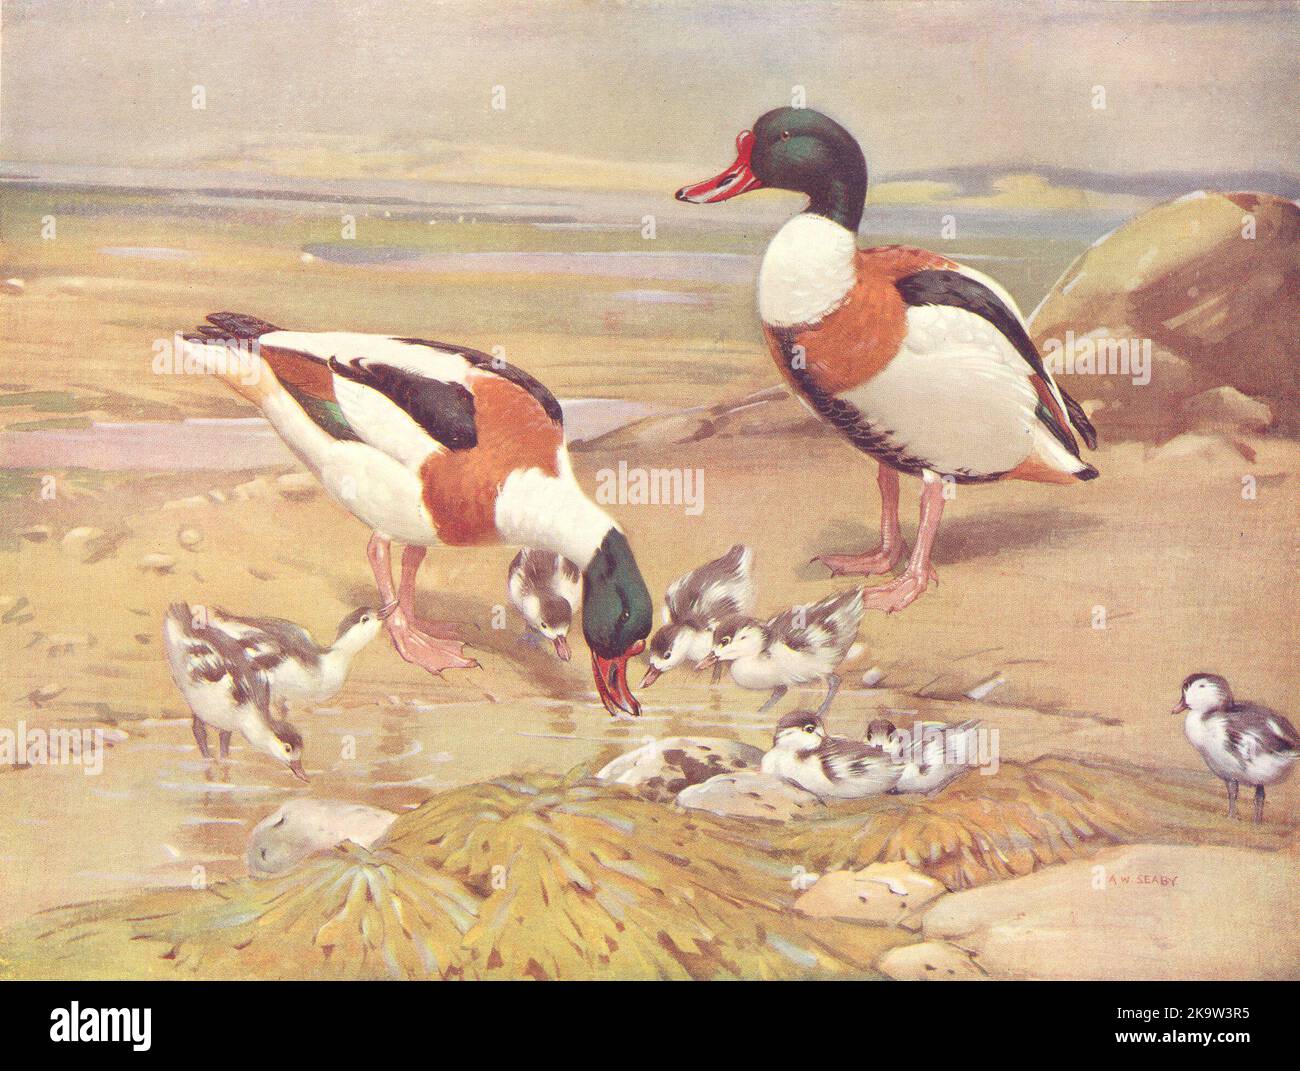 BIRDS. Wildfowl. Sheldrake (right) Shelduck and Ducklings 1924 old print Stock Photo